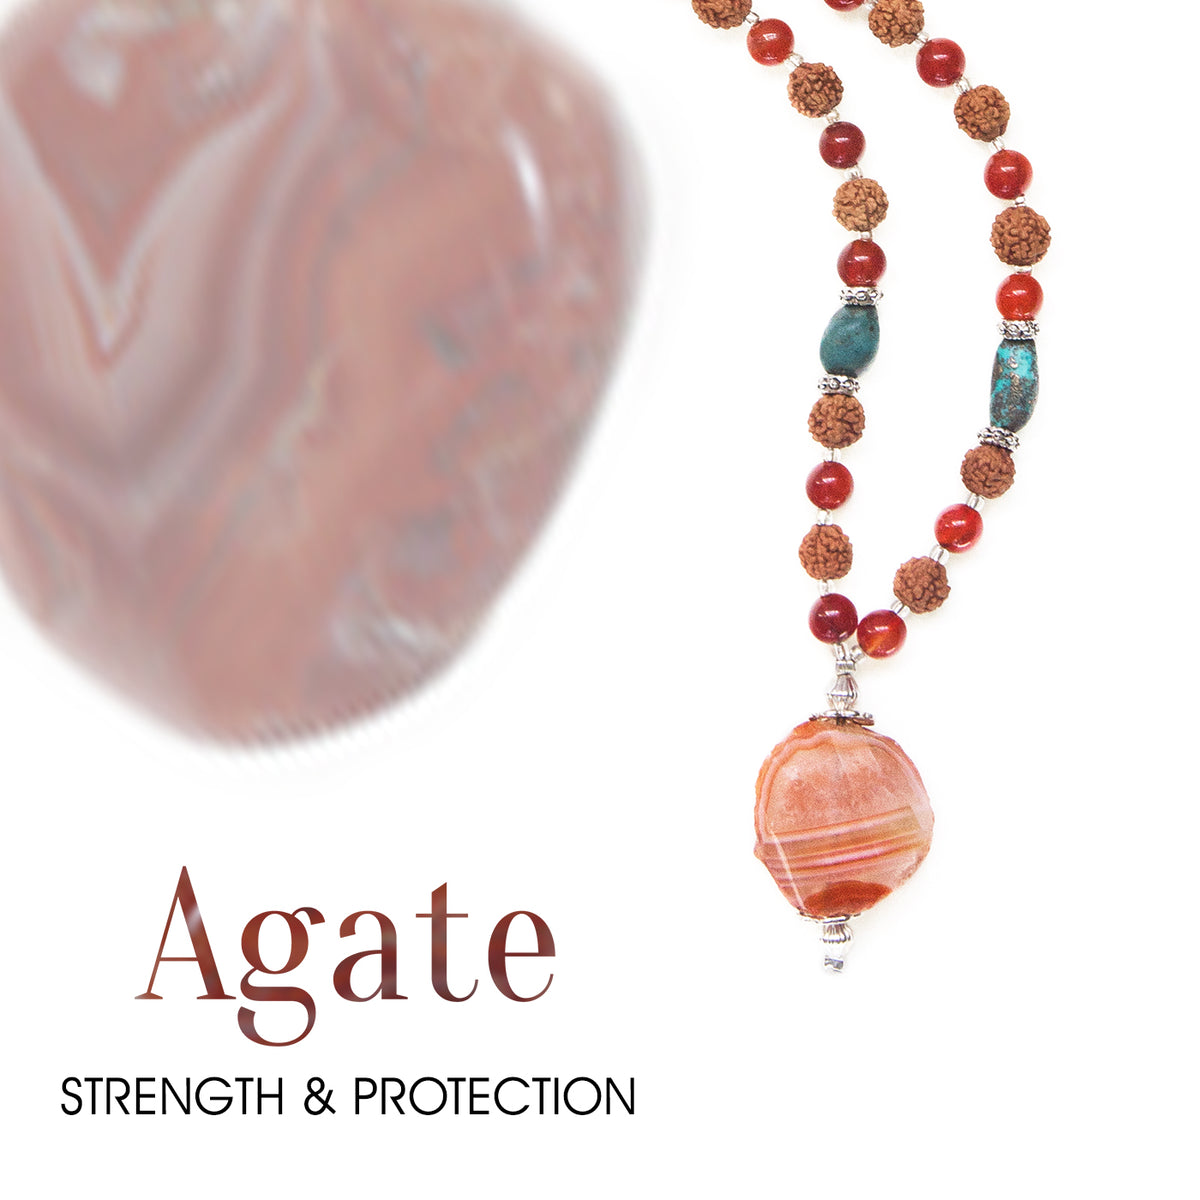 Agate: Strength & Protection